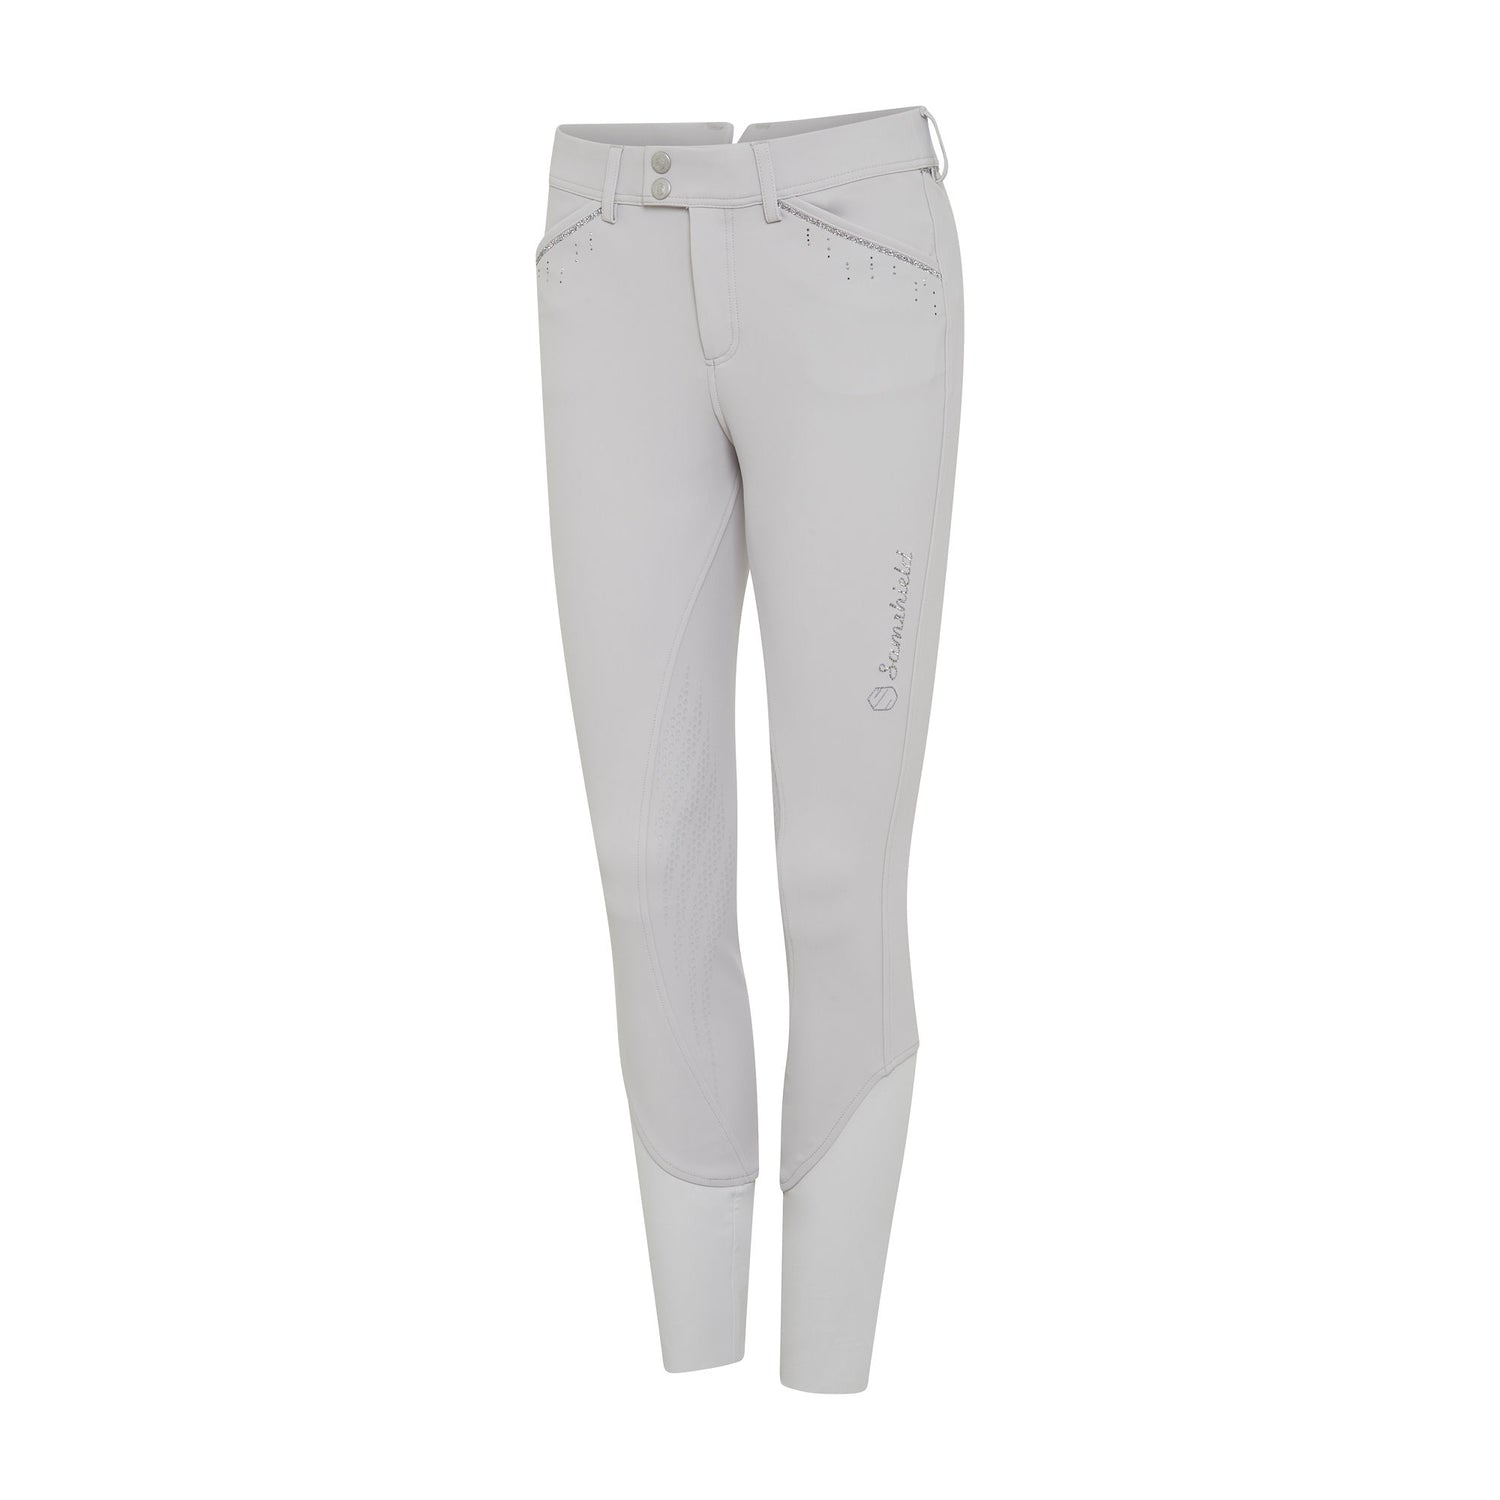 The Celeste knee grip breeches in stone grey by Samshield. These breeches have a subtle glitter detailing on the front pockets with a glitter trim and finished with a scattered gem design underneath the strip